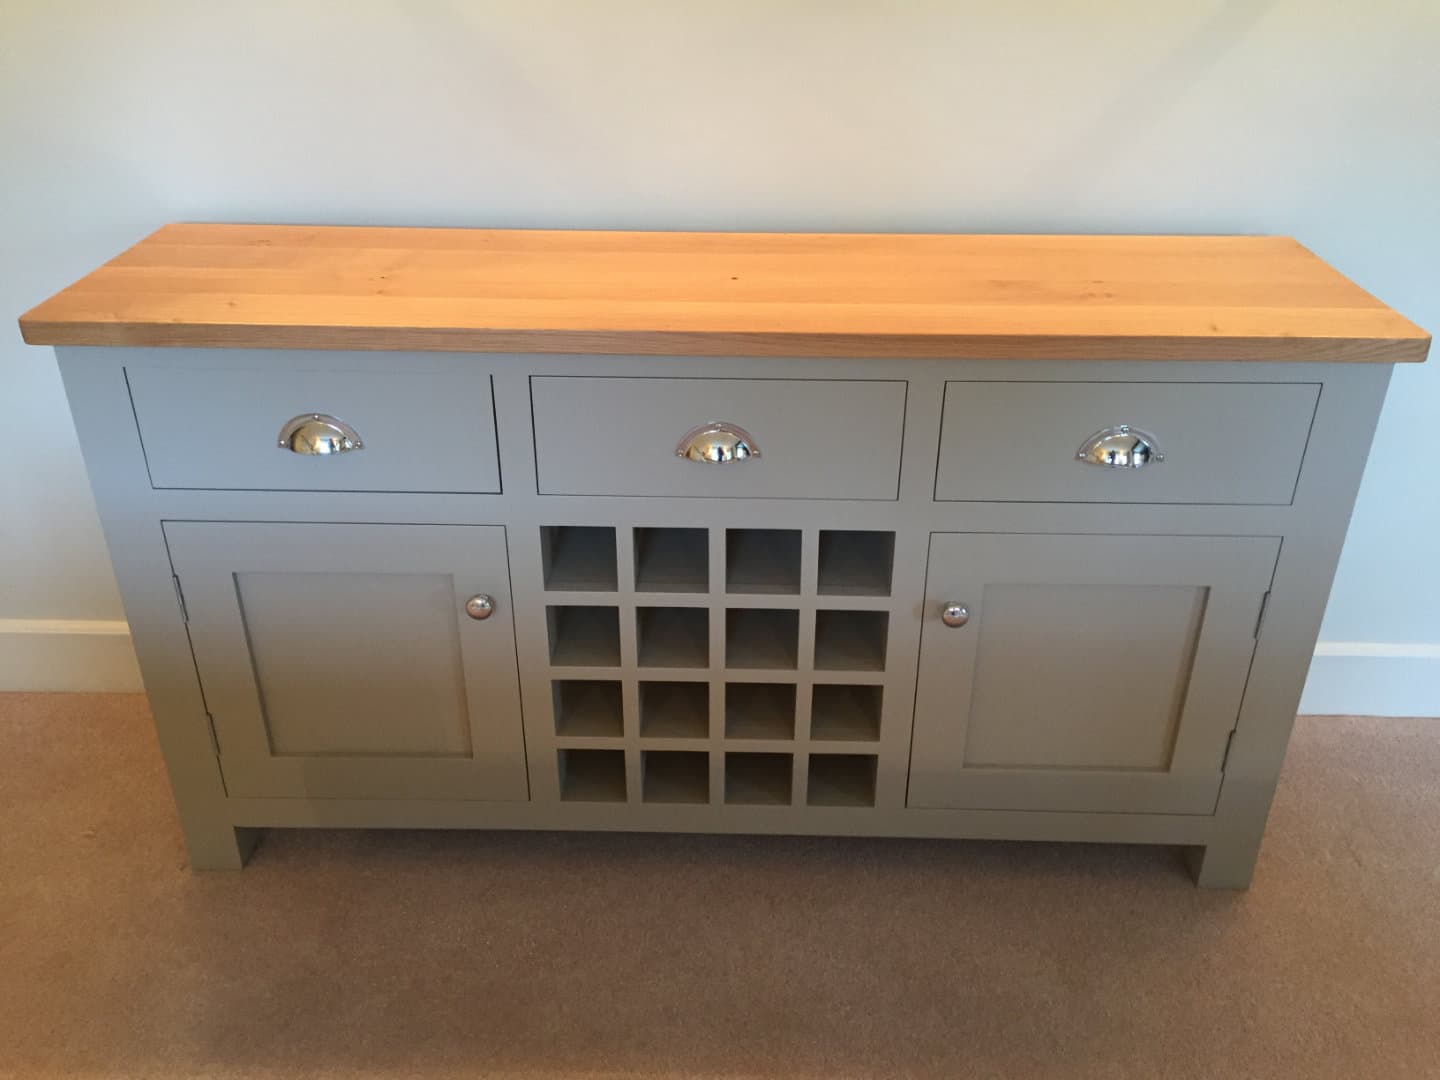 A beautiful wooden sideboard with an oak top finish